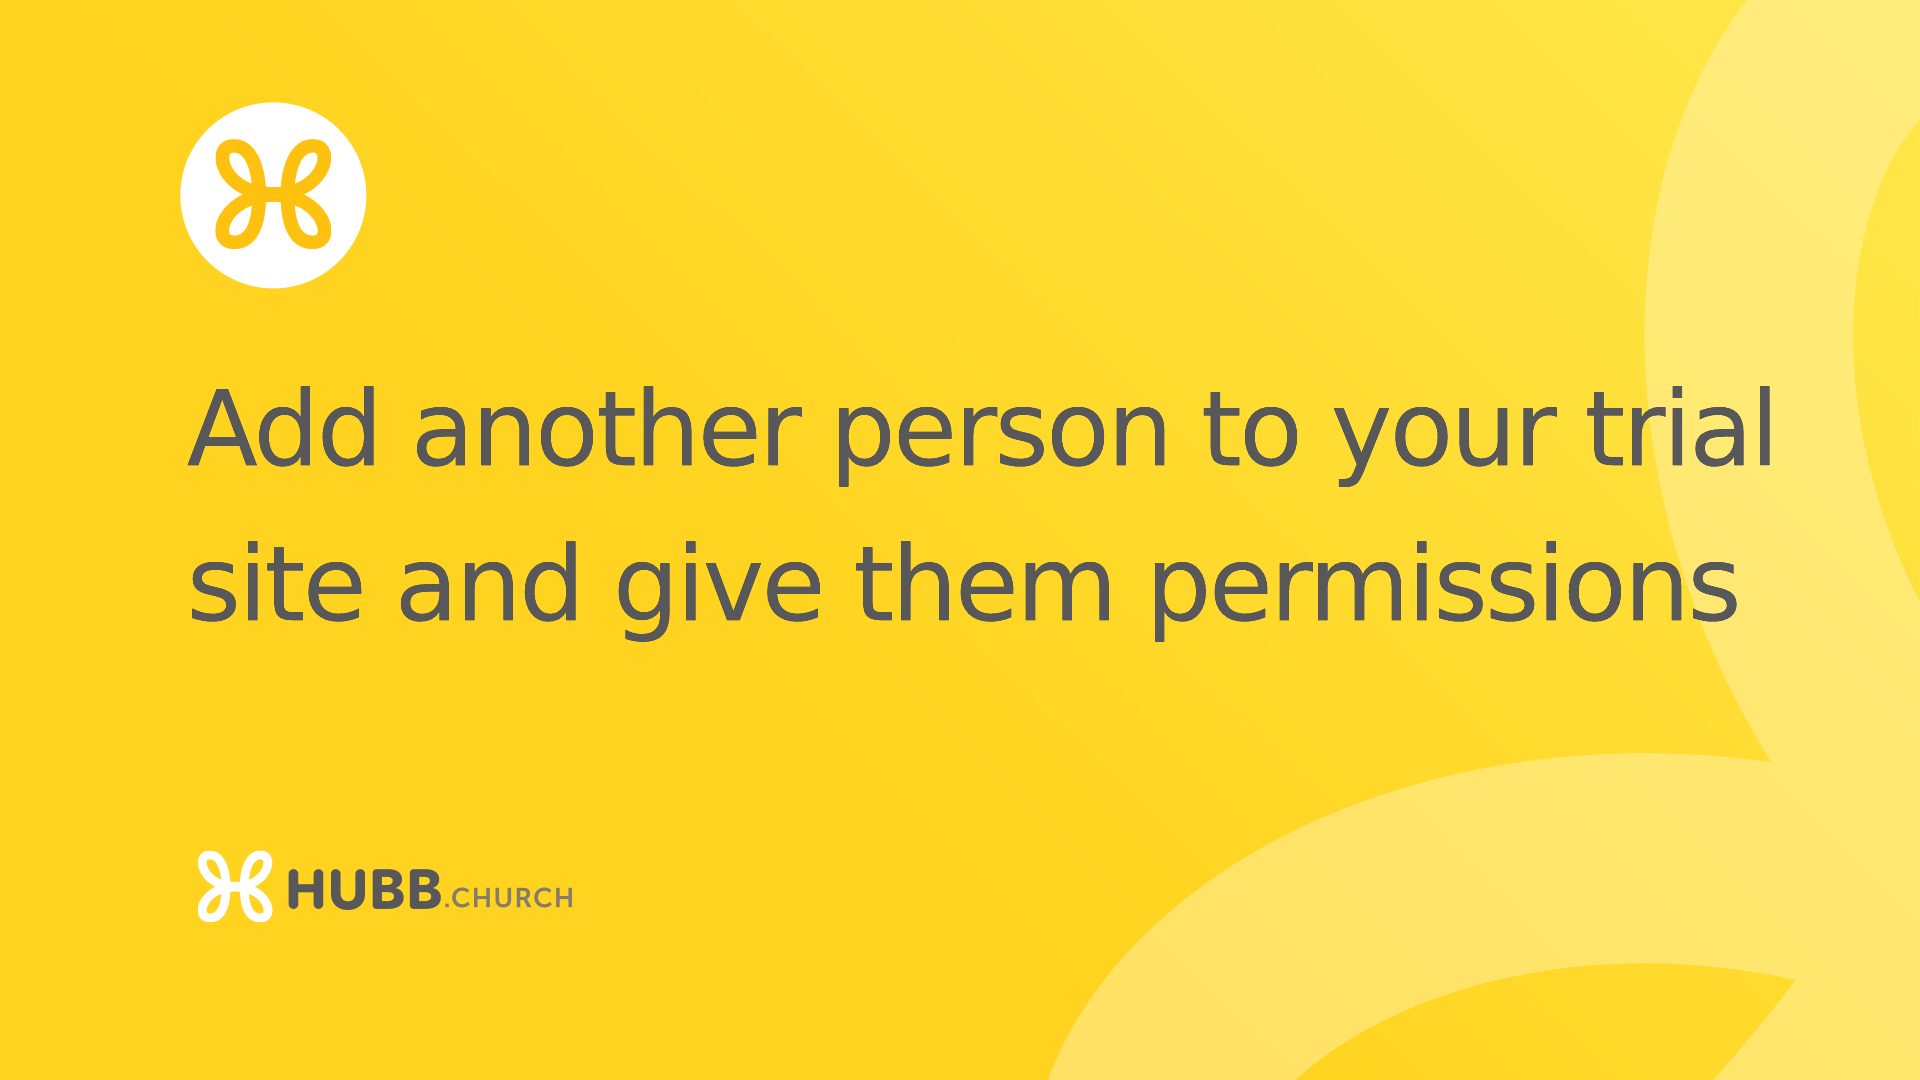 Add another person to your trial site and give them permissions